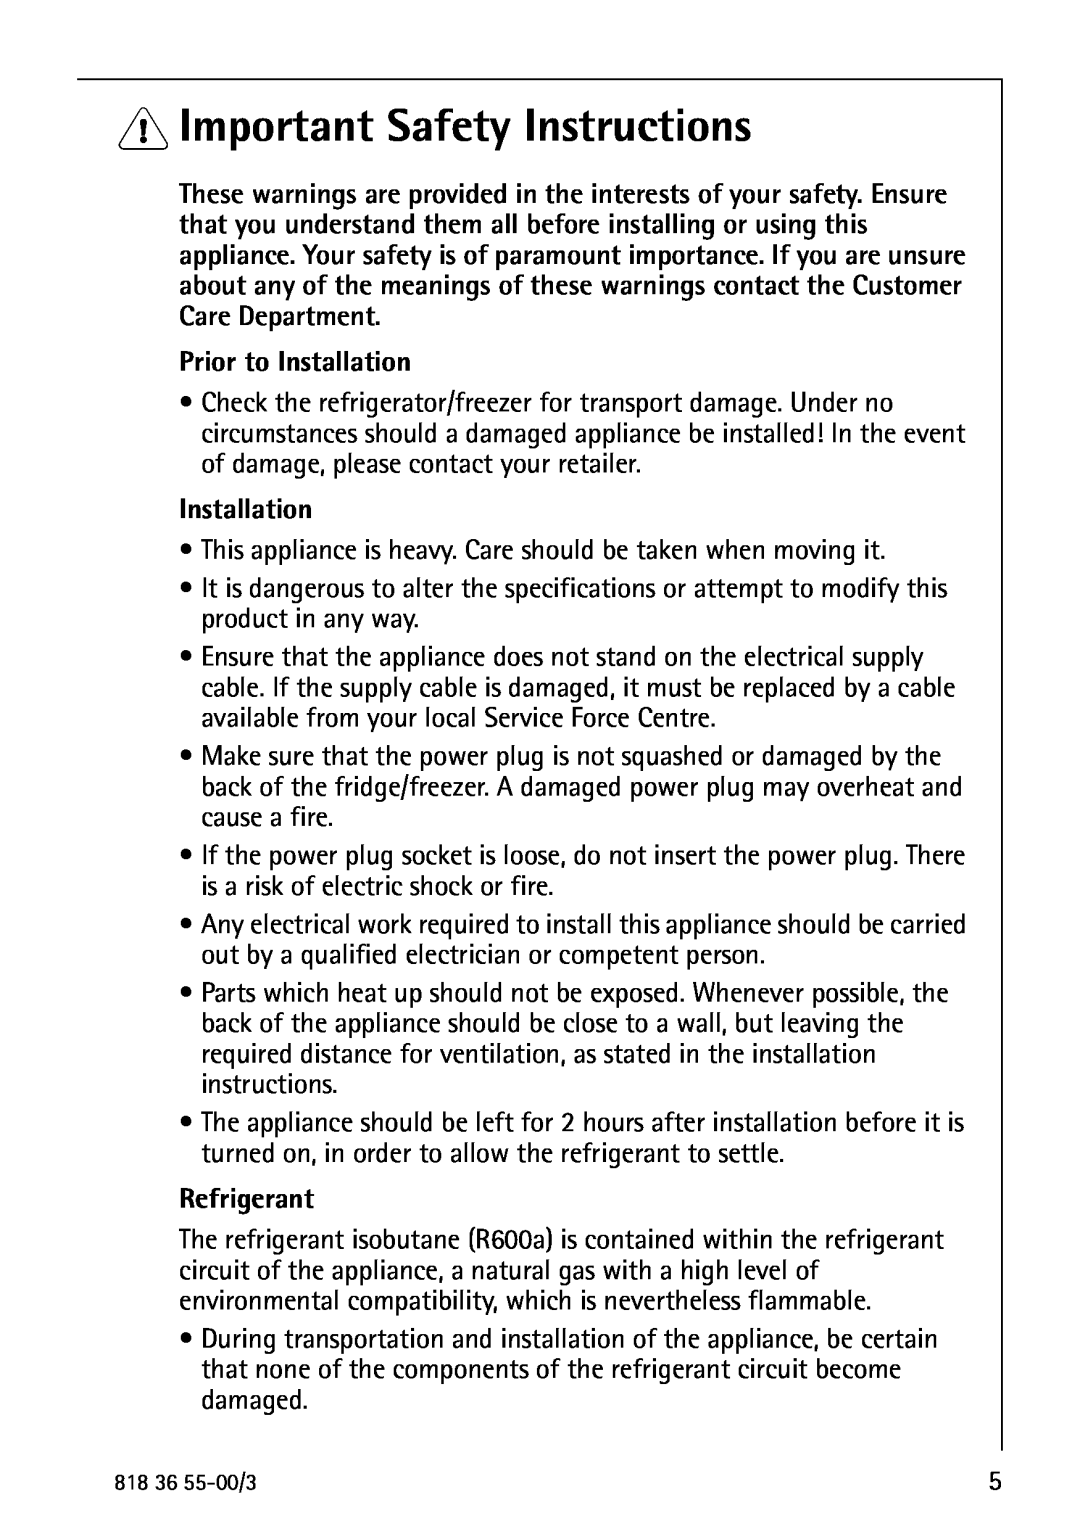 AEG 86378-KG operating instructions Important Safety Instructions, Prior to Installation, Refrigerant 